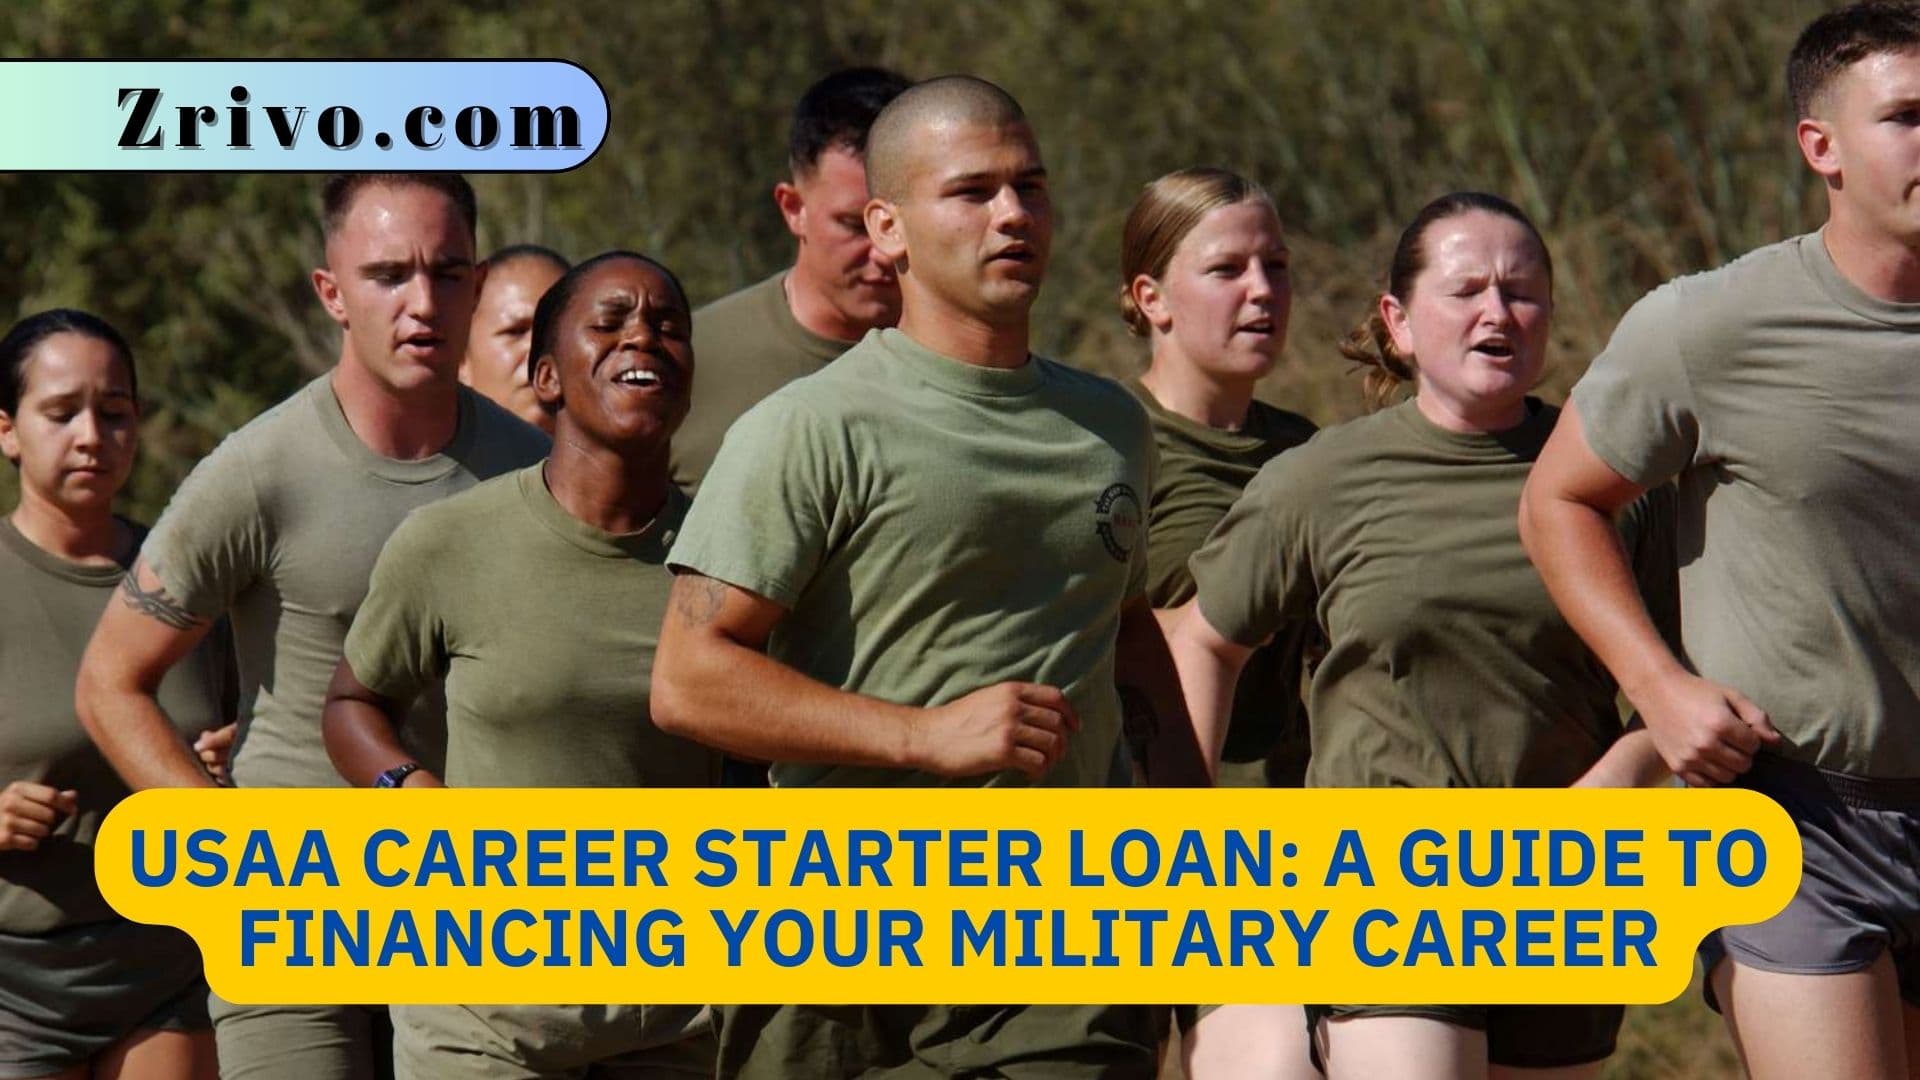 USAA Career Starter Loan A Guide to Financing Your Military Career